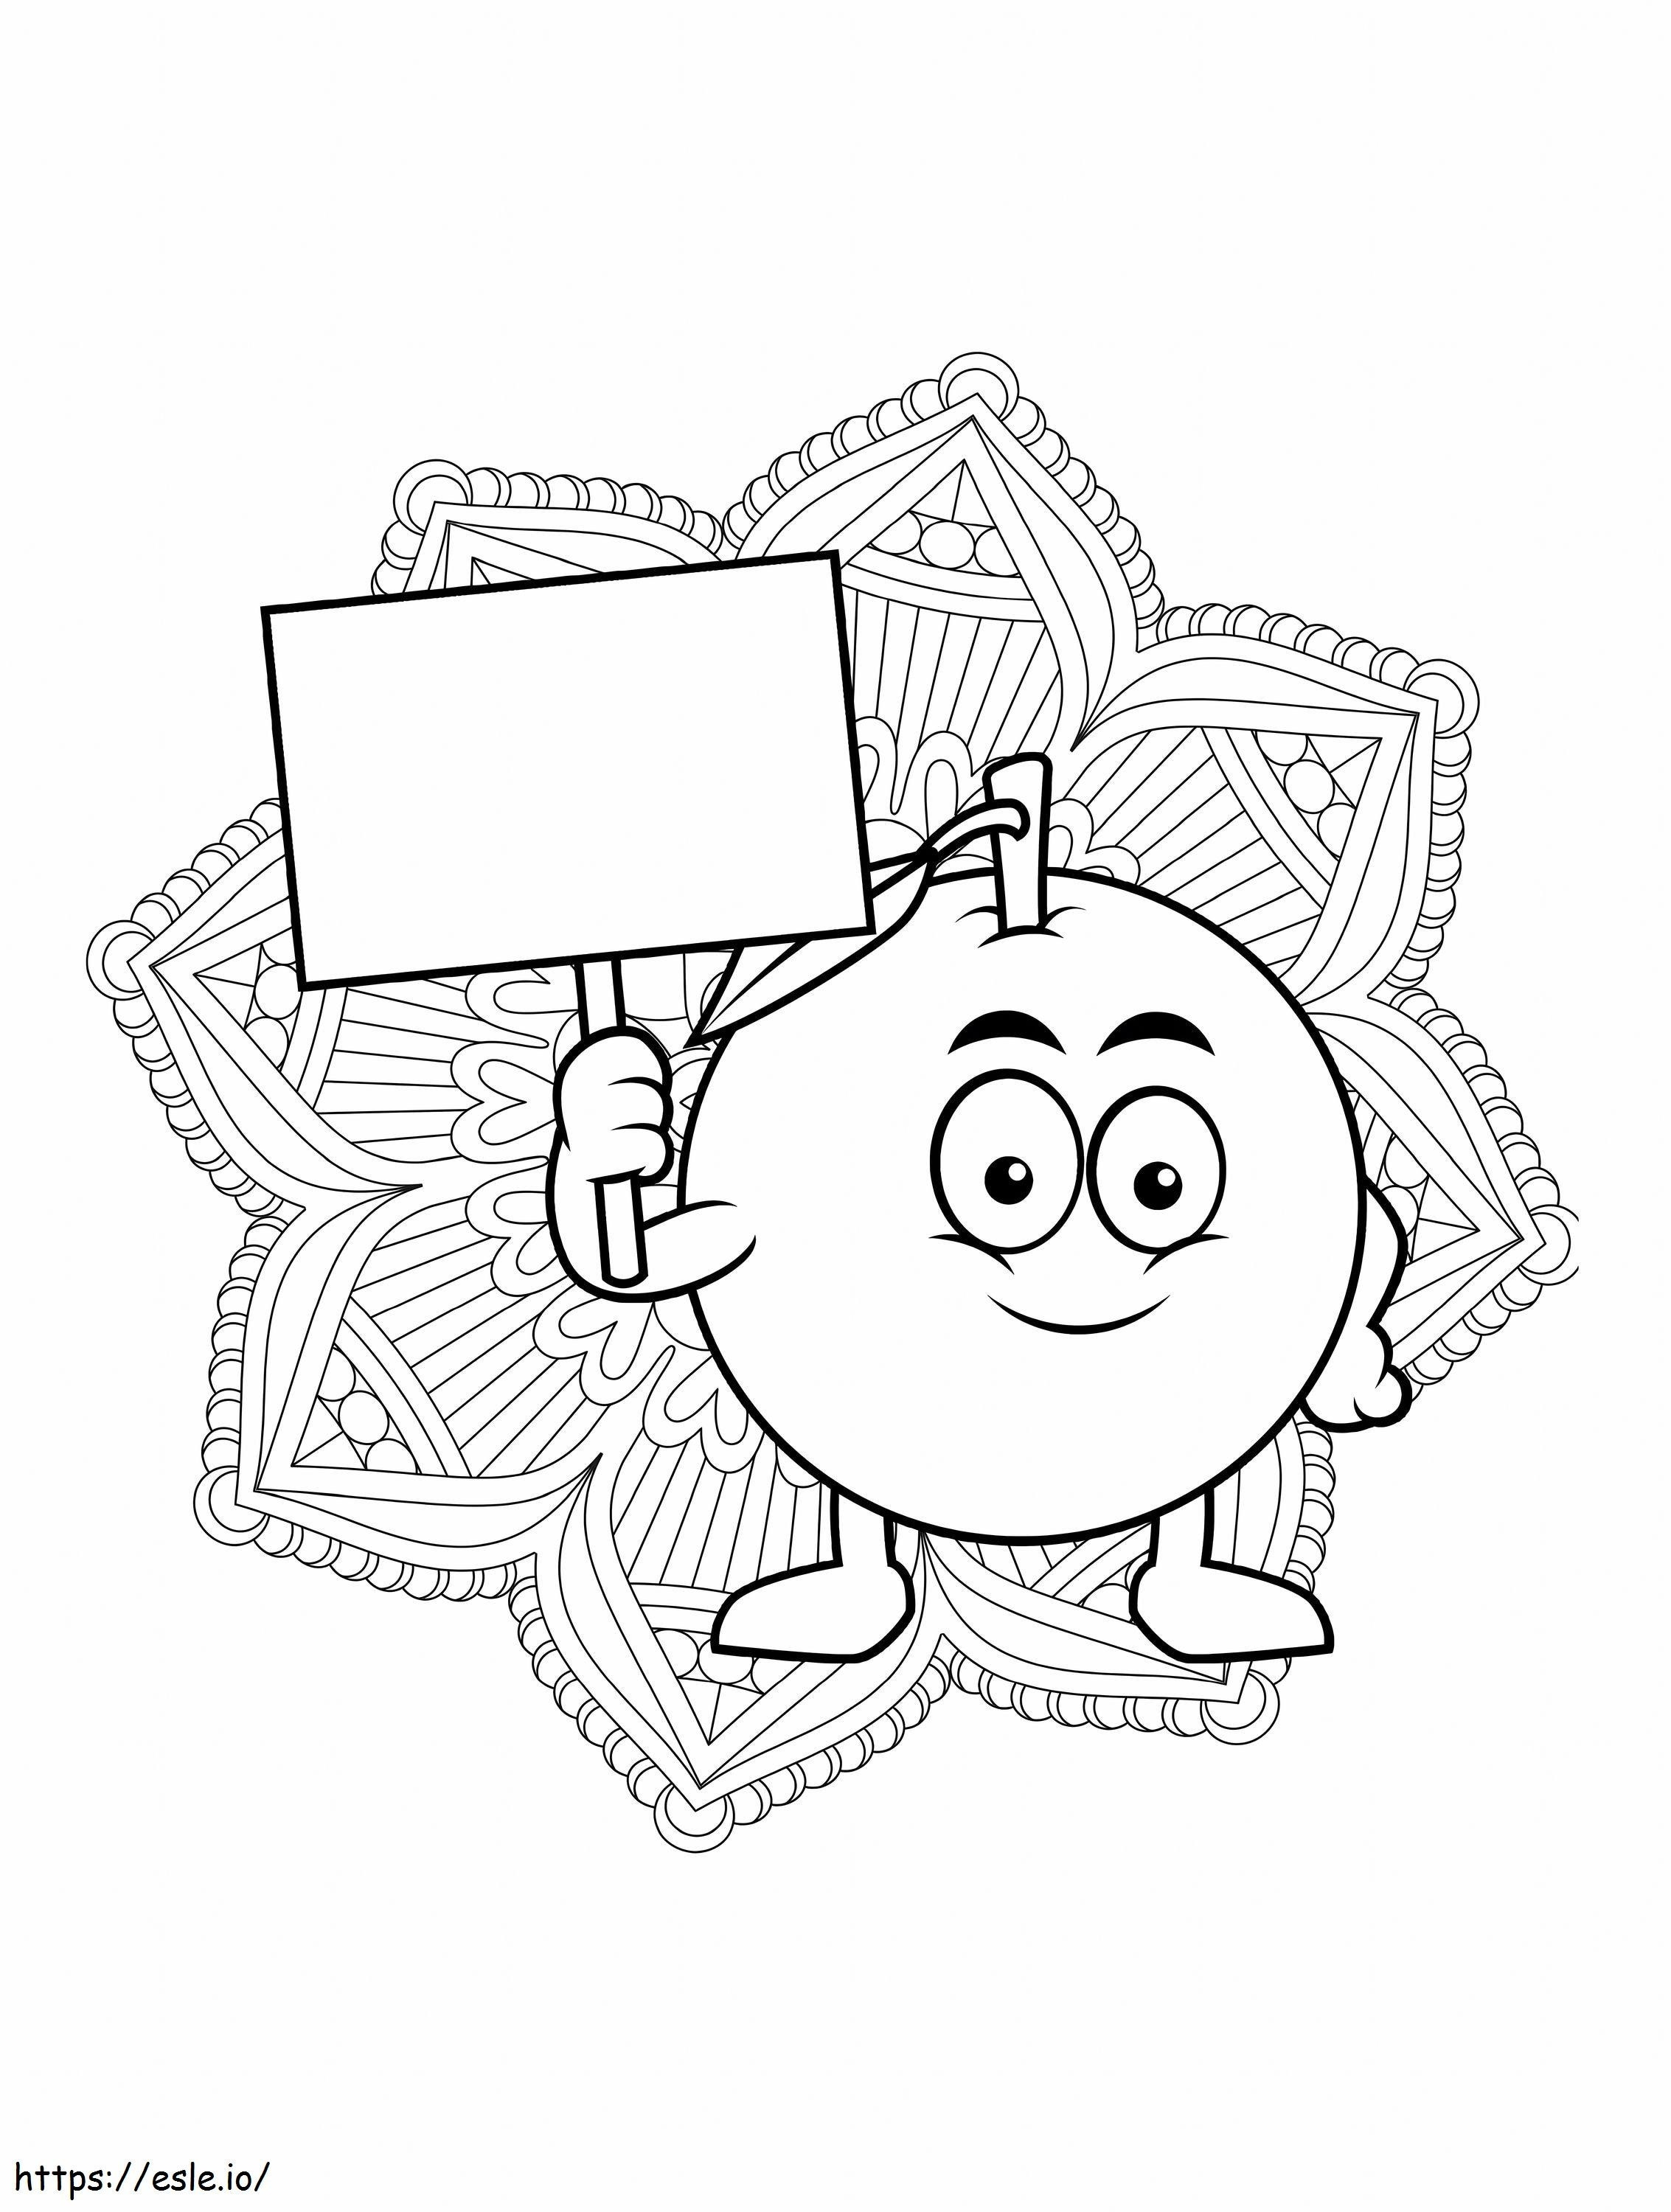 Kumquat Smiling Scaled coloring page